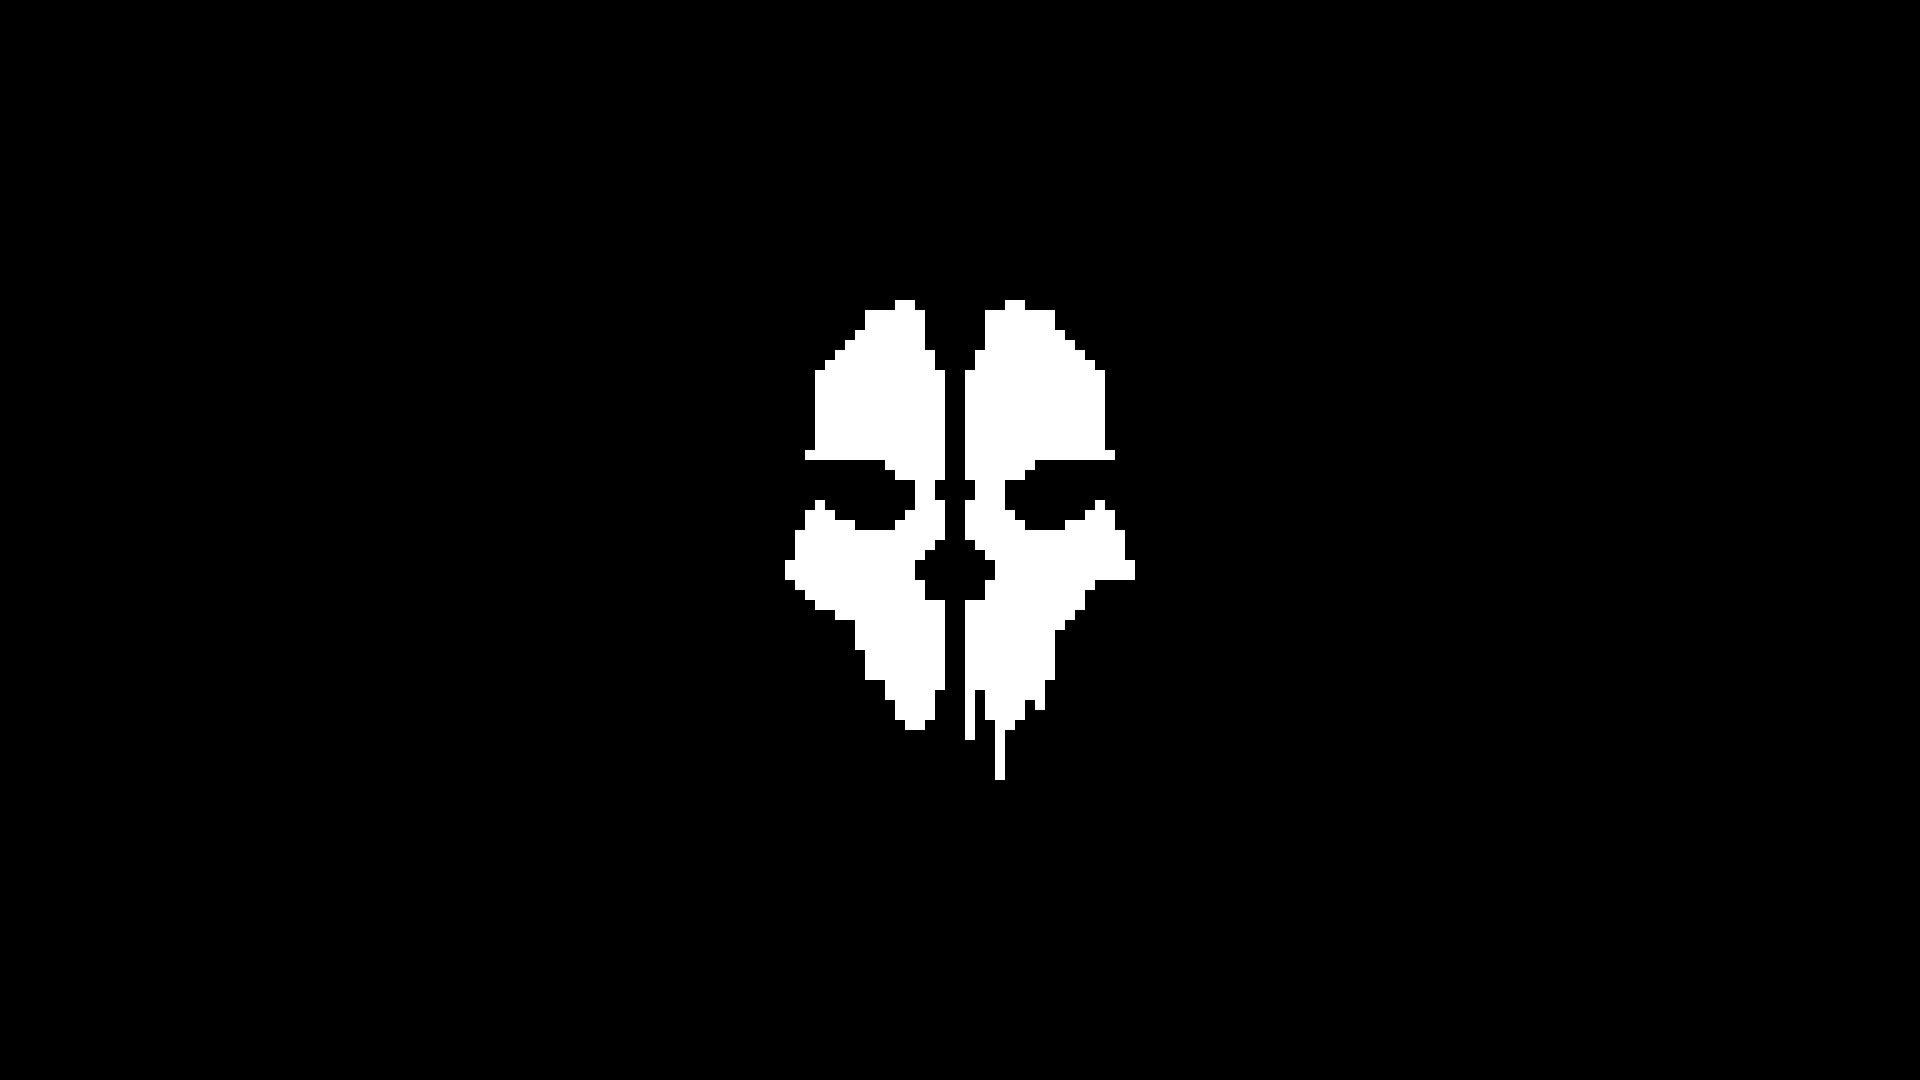 General 1920x1080 pixel art pixels Call of Duty: Ghosts Call of Duty PC gaming video games minimalism simple background black background video game art skull